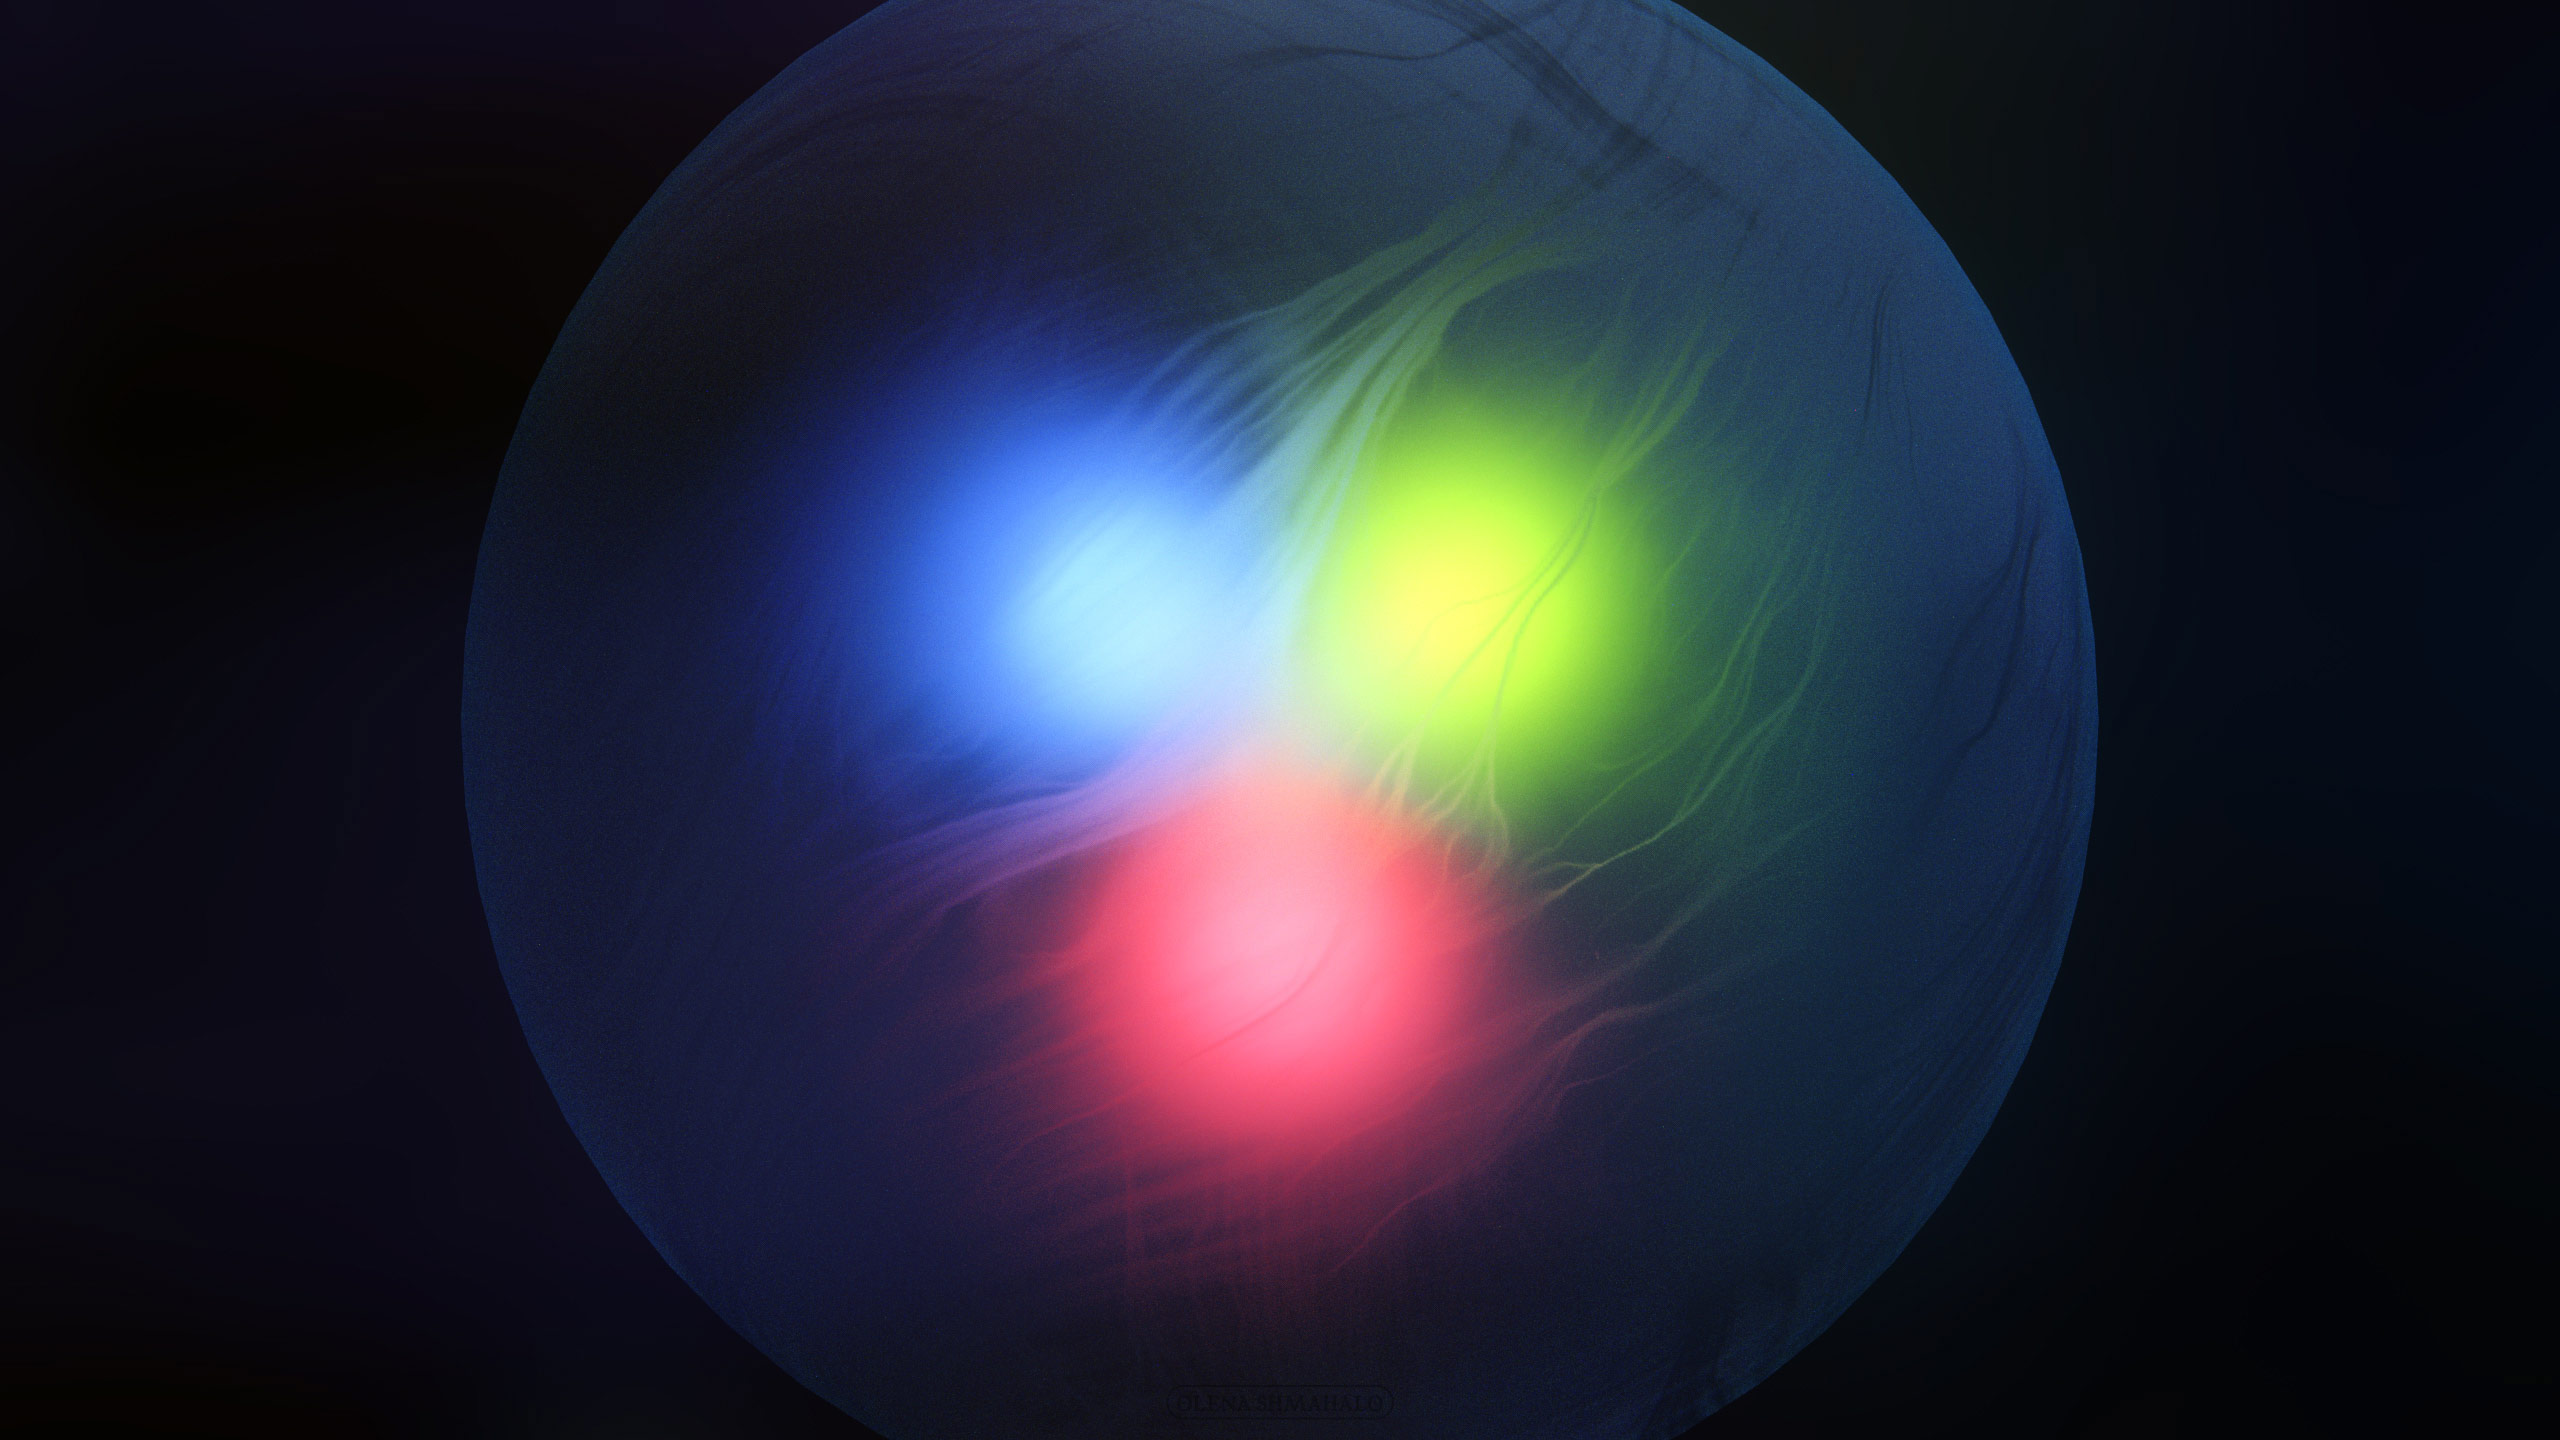 A proton particle on a dark background.